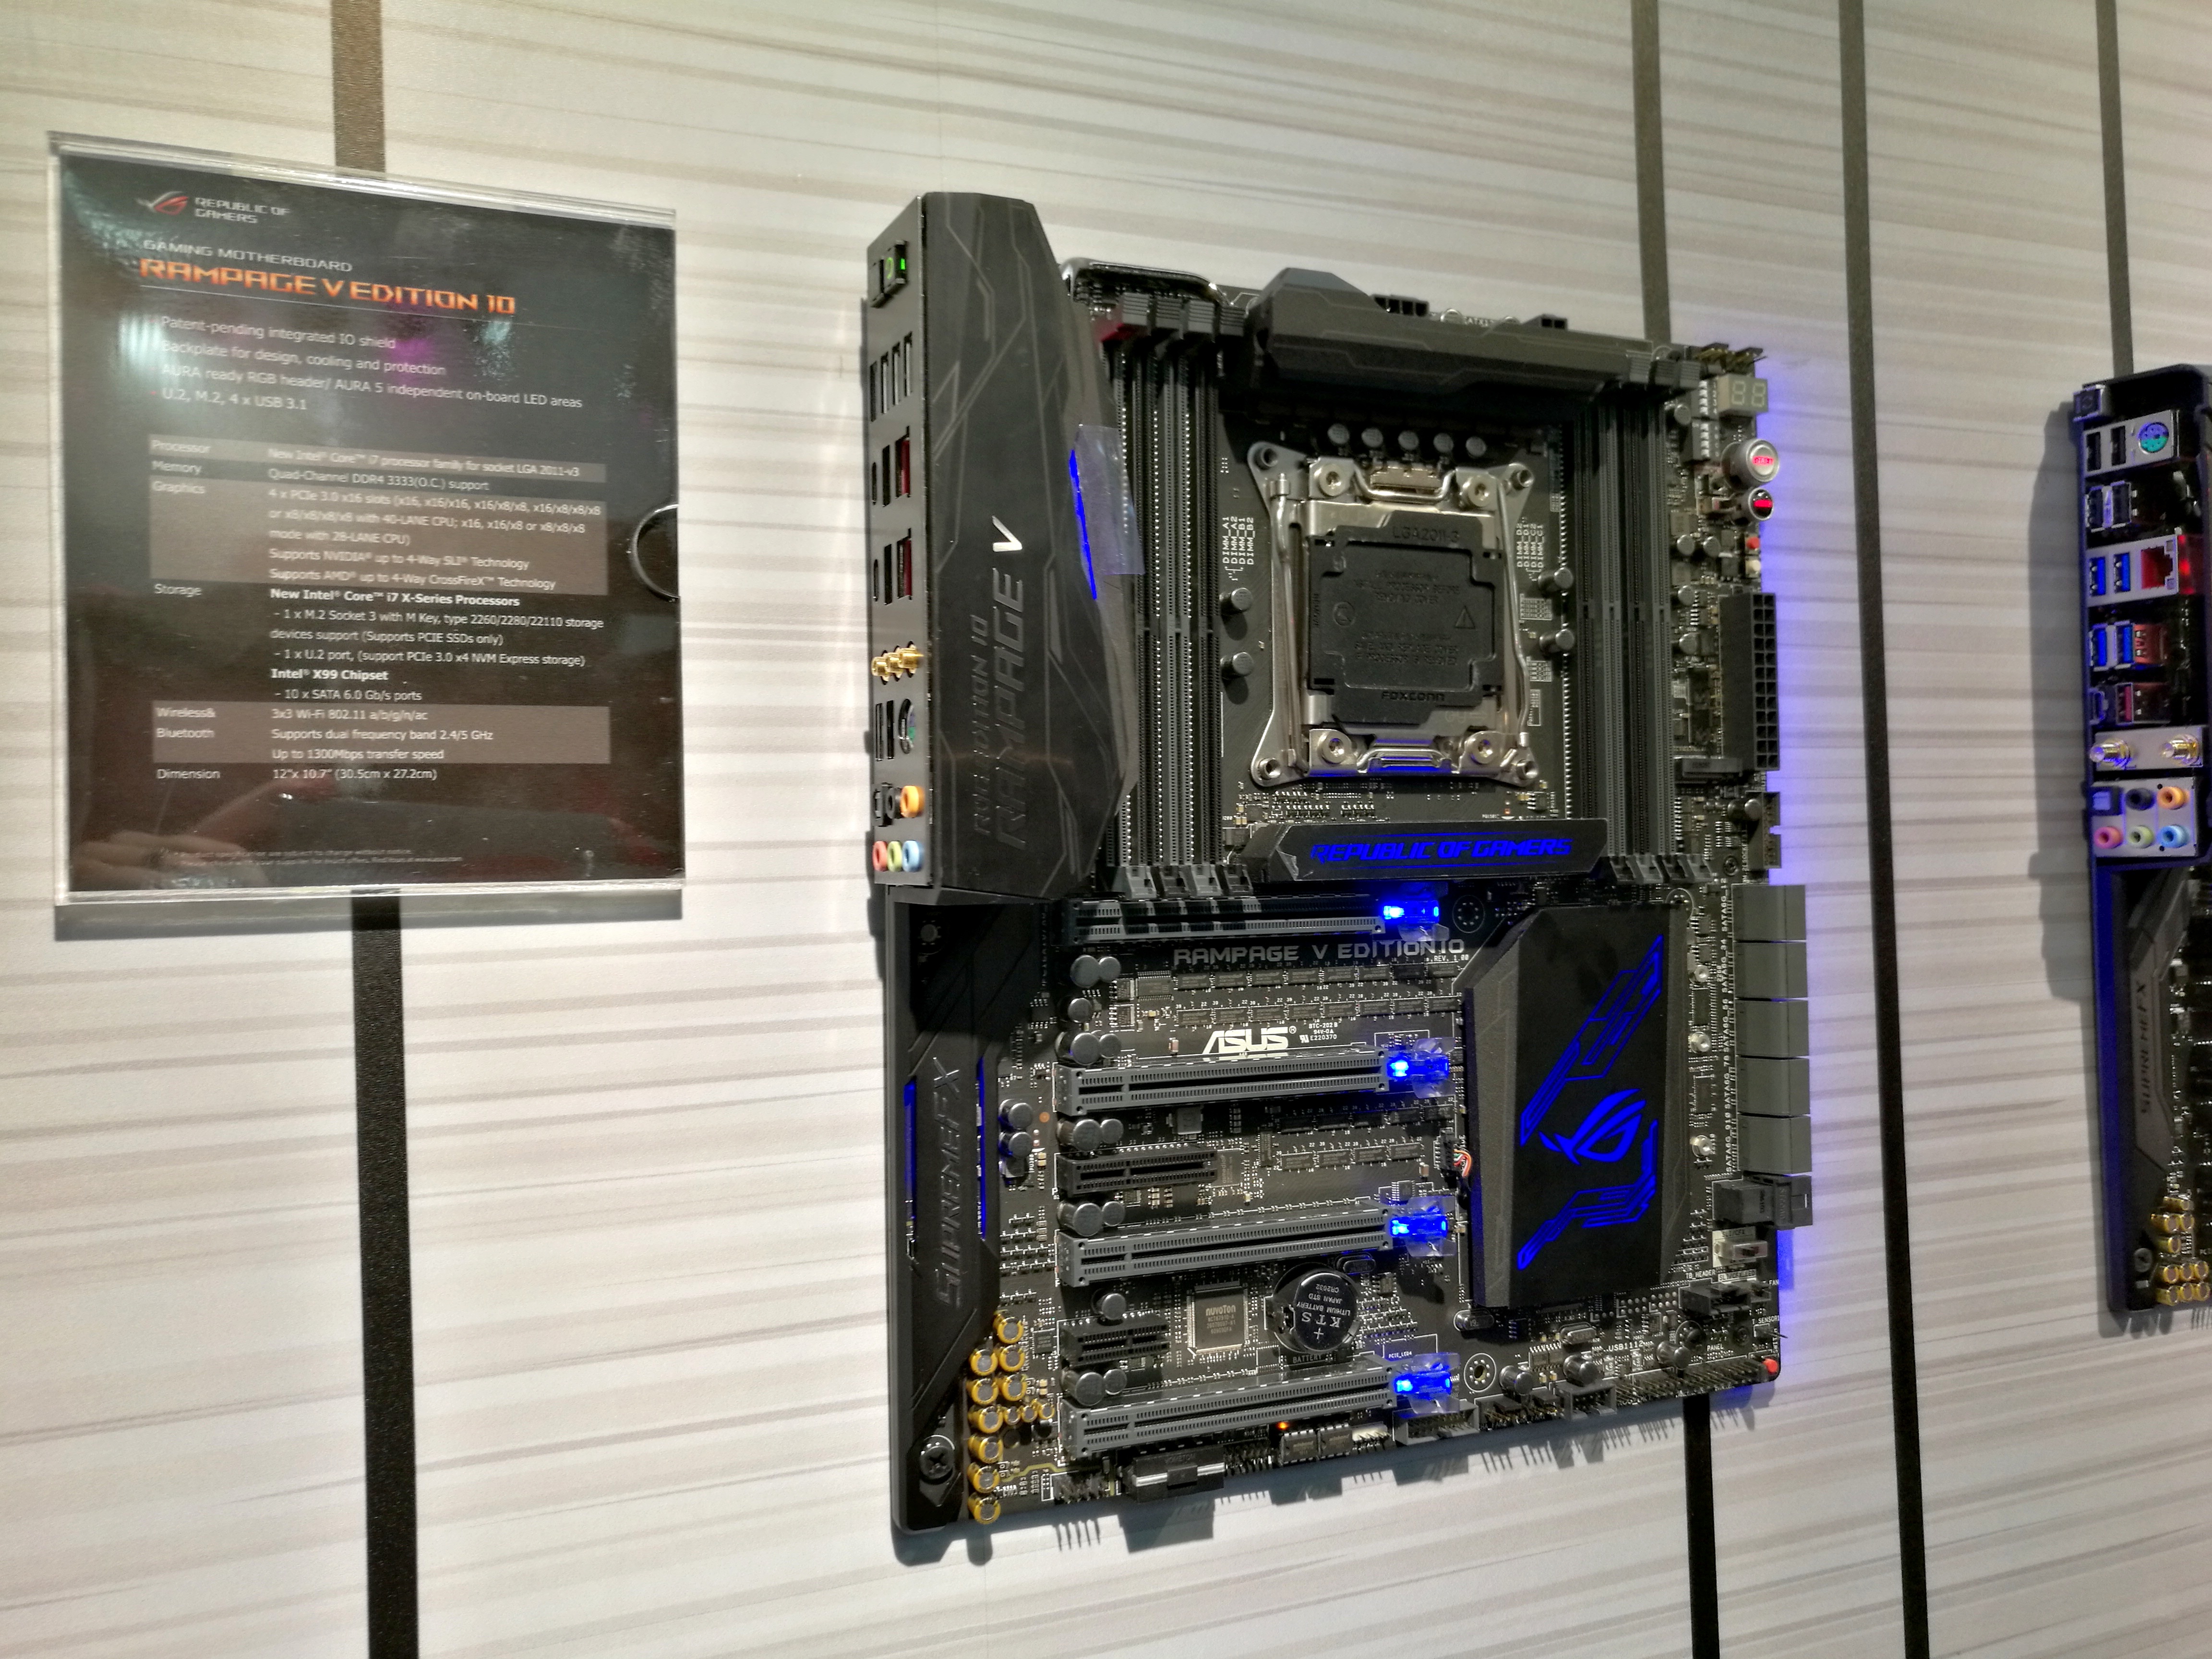 Motherboards: Rampage V Edition 10 and X99 Strix Gaming - ASUS at